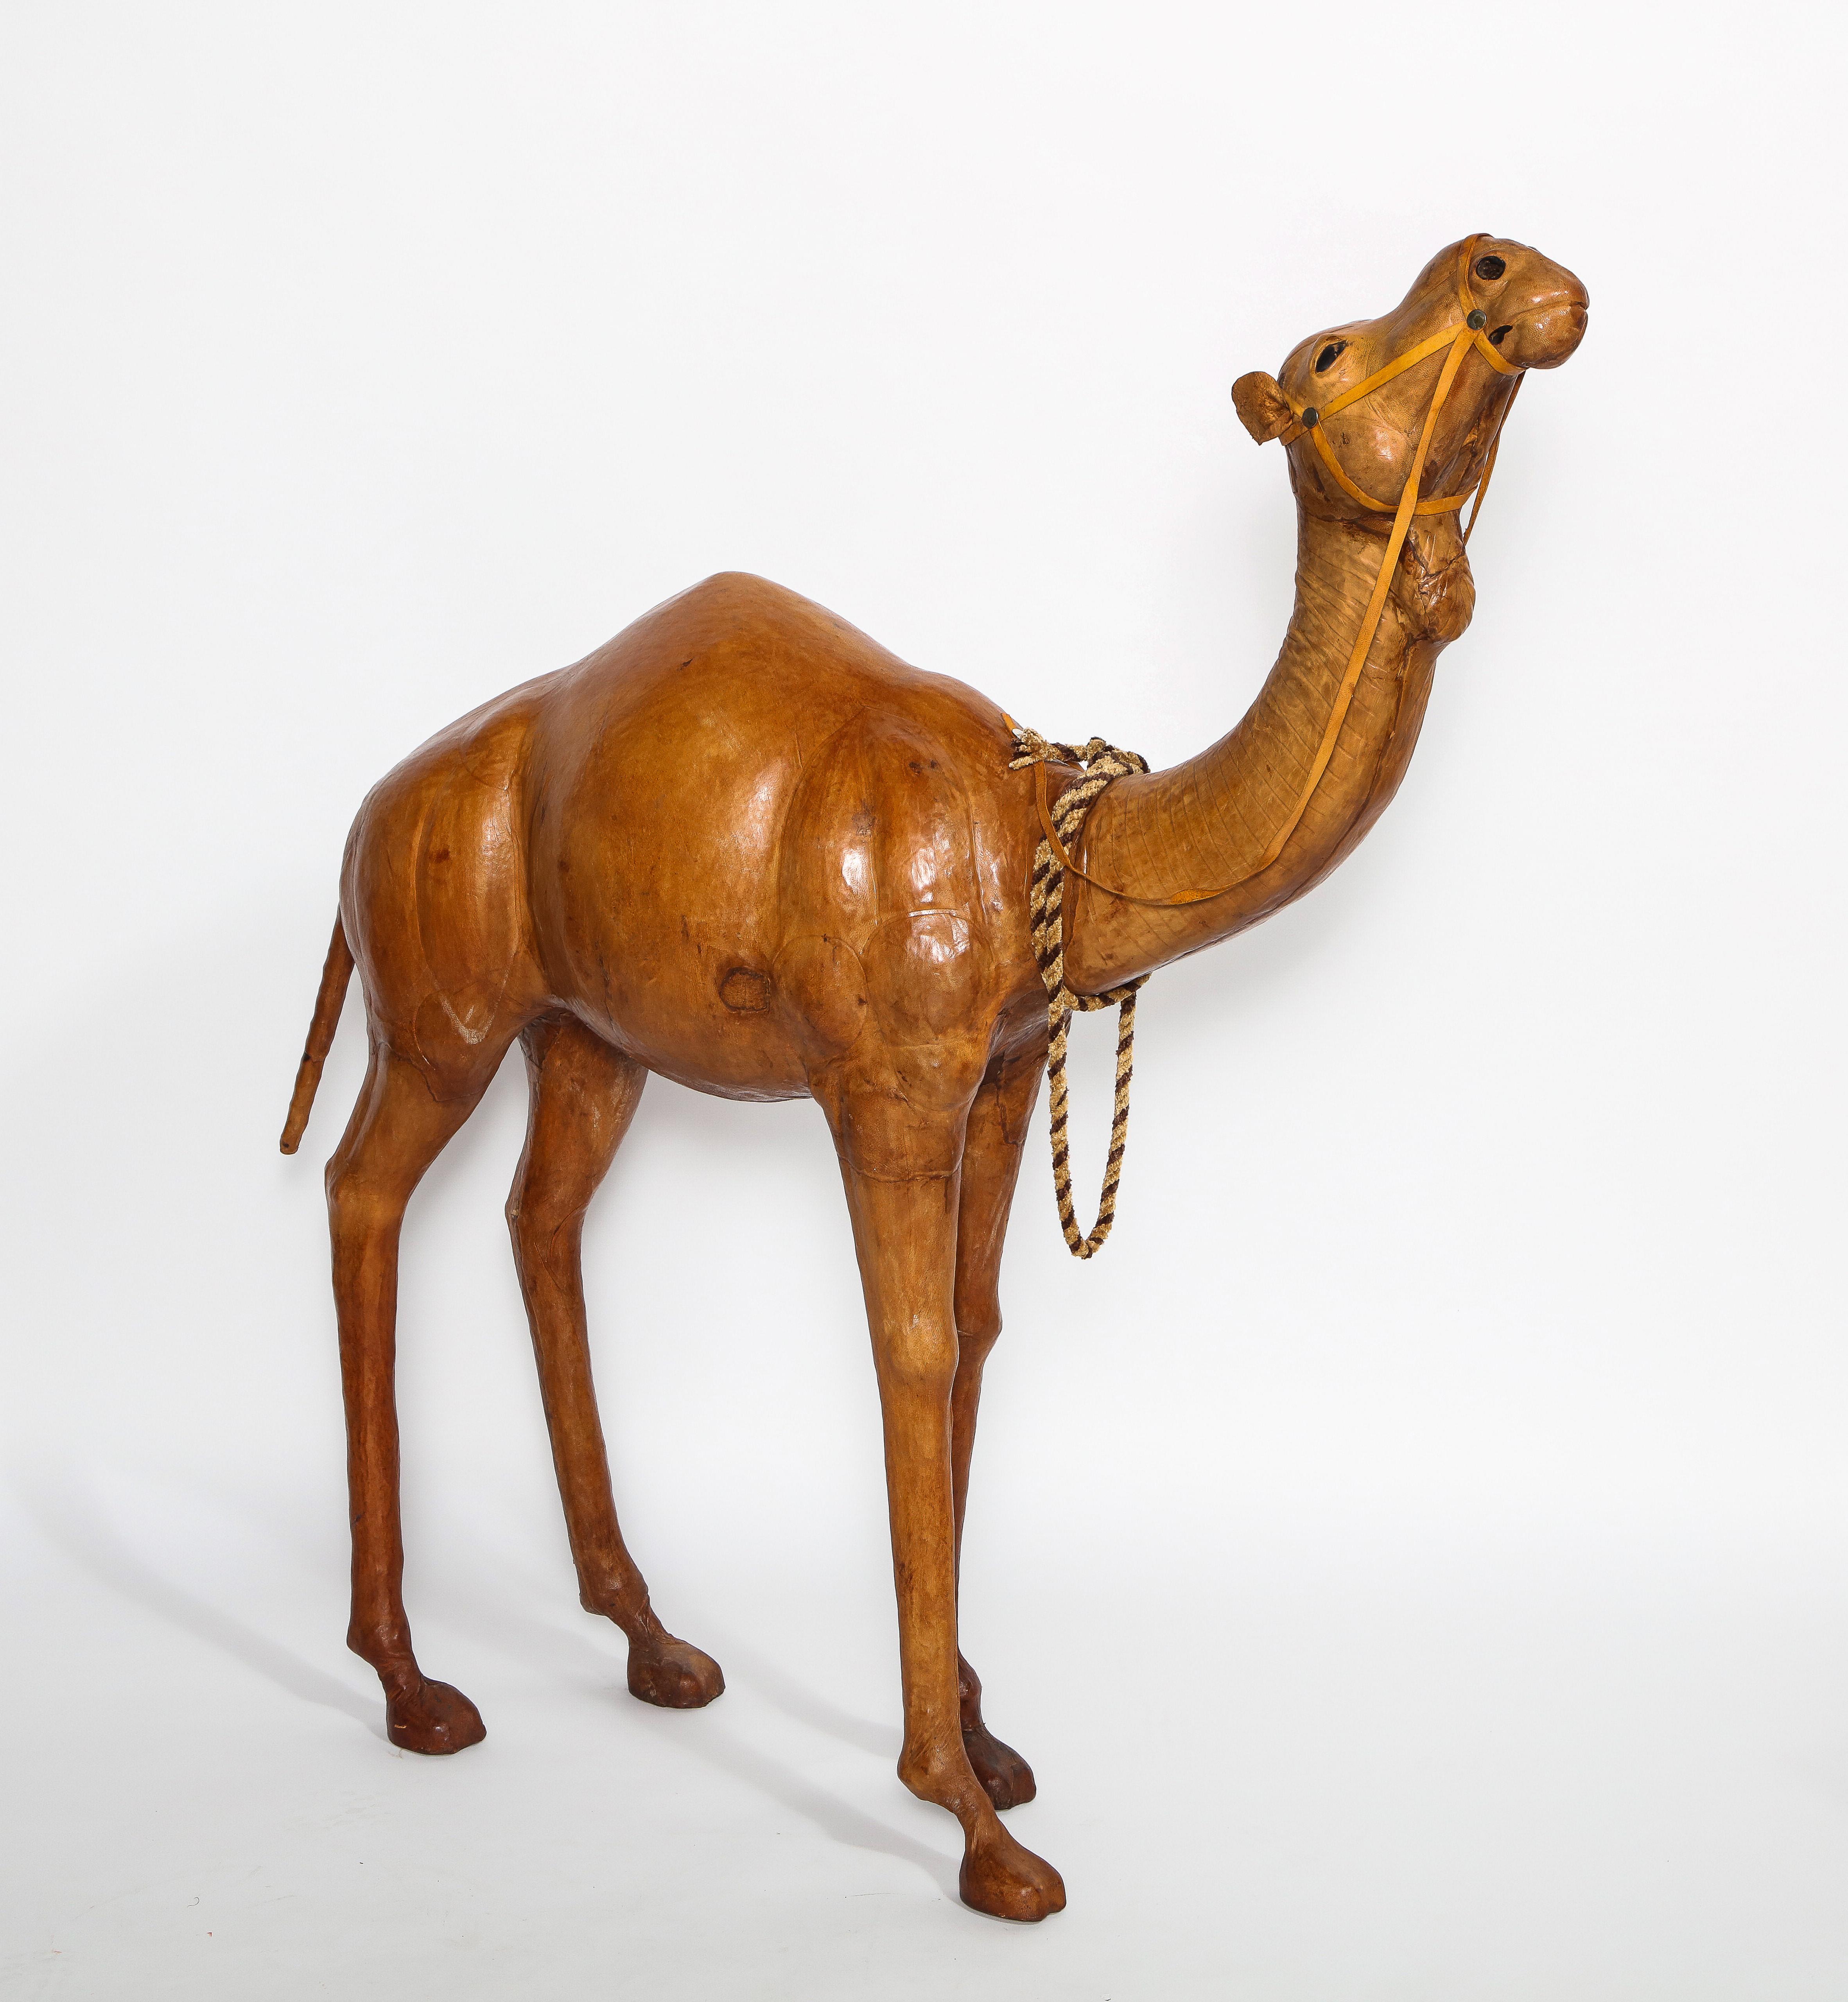 A Very Unusual and Rare French 1940s model of a Camel, made of natural tanned leather. This is truly an elaborate piece for any home decor. This piece is made of naturally tanned leather, all handstitched together with impressive craftsmanship.